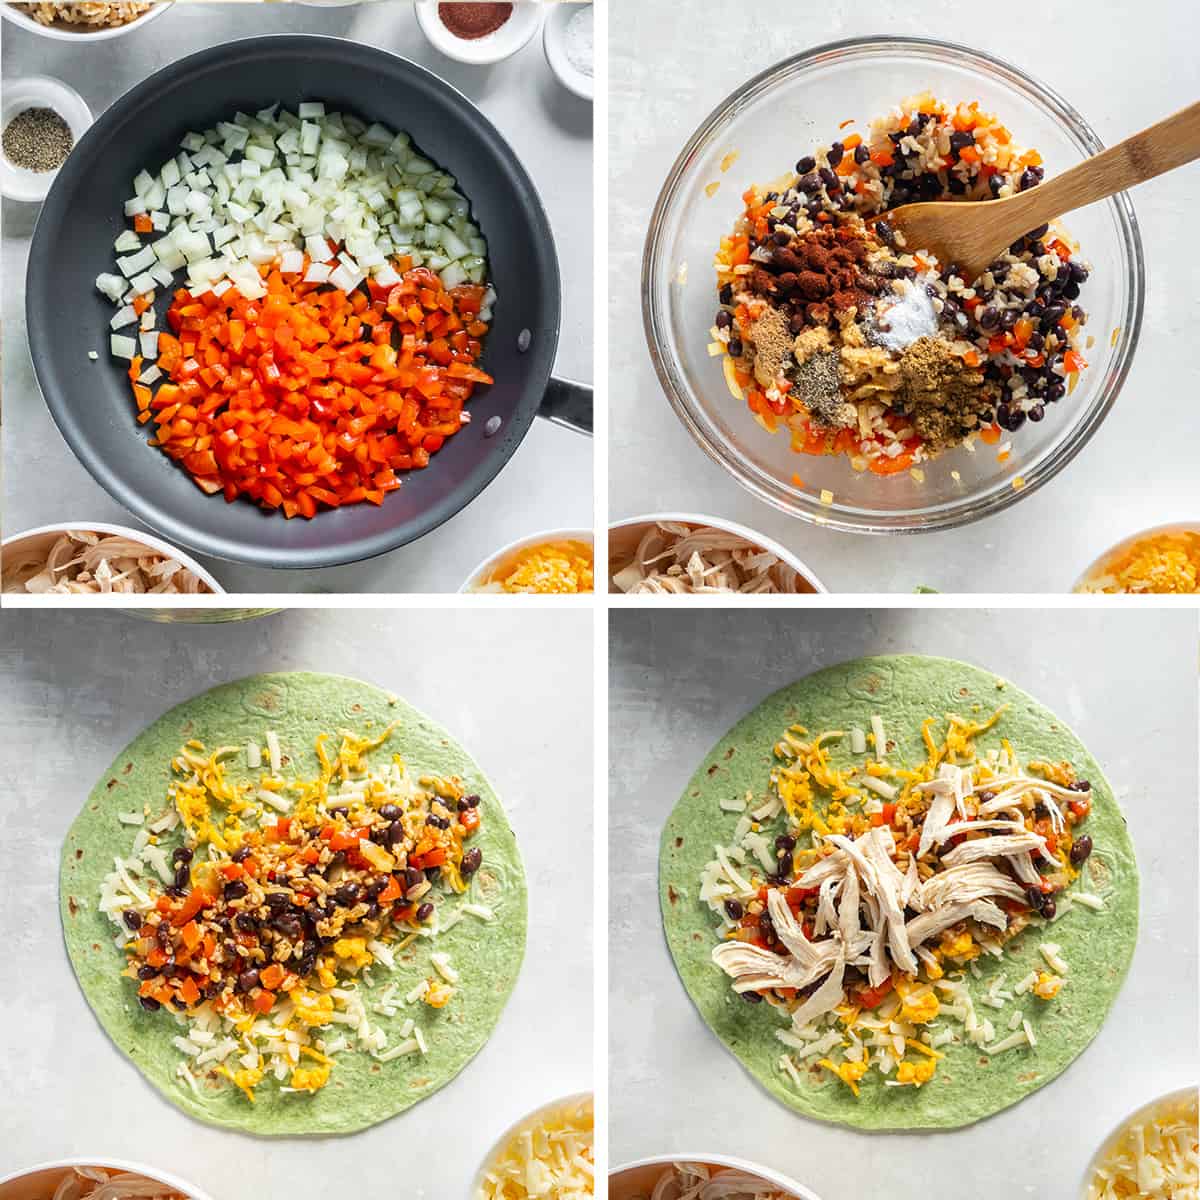 Four images that show peppers and onions cooking in a skillet and combined with rice and beans in a bowl with seasonings. The mixture is then wrapped in green tortillas with cheese and chicken.